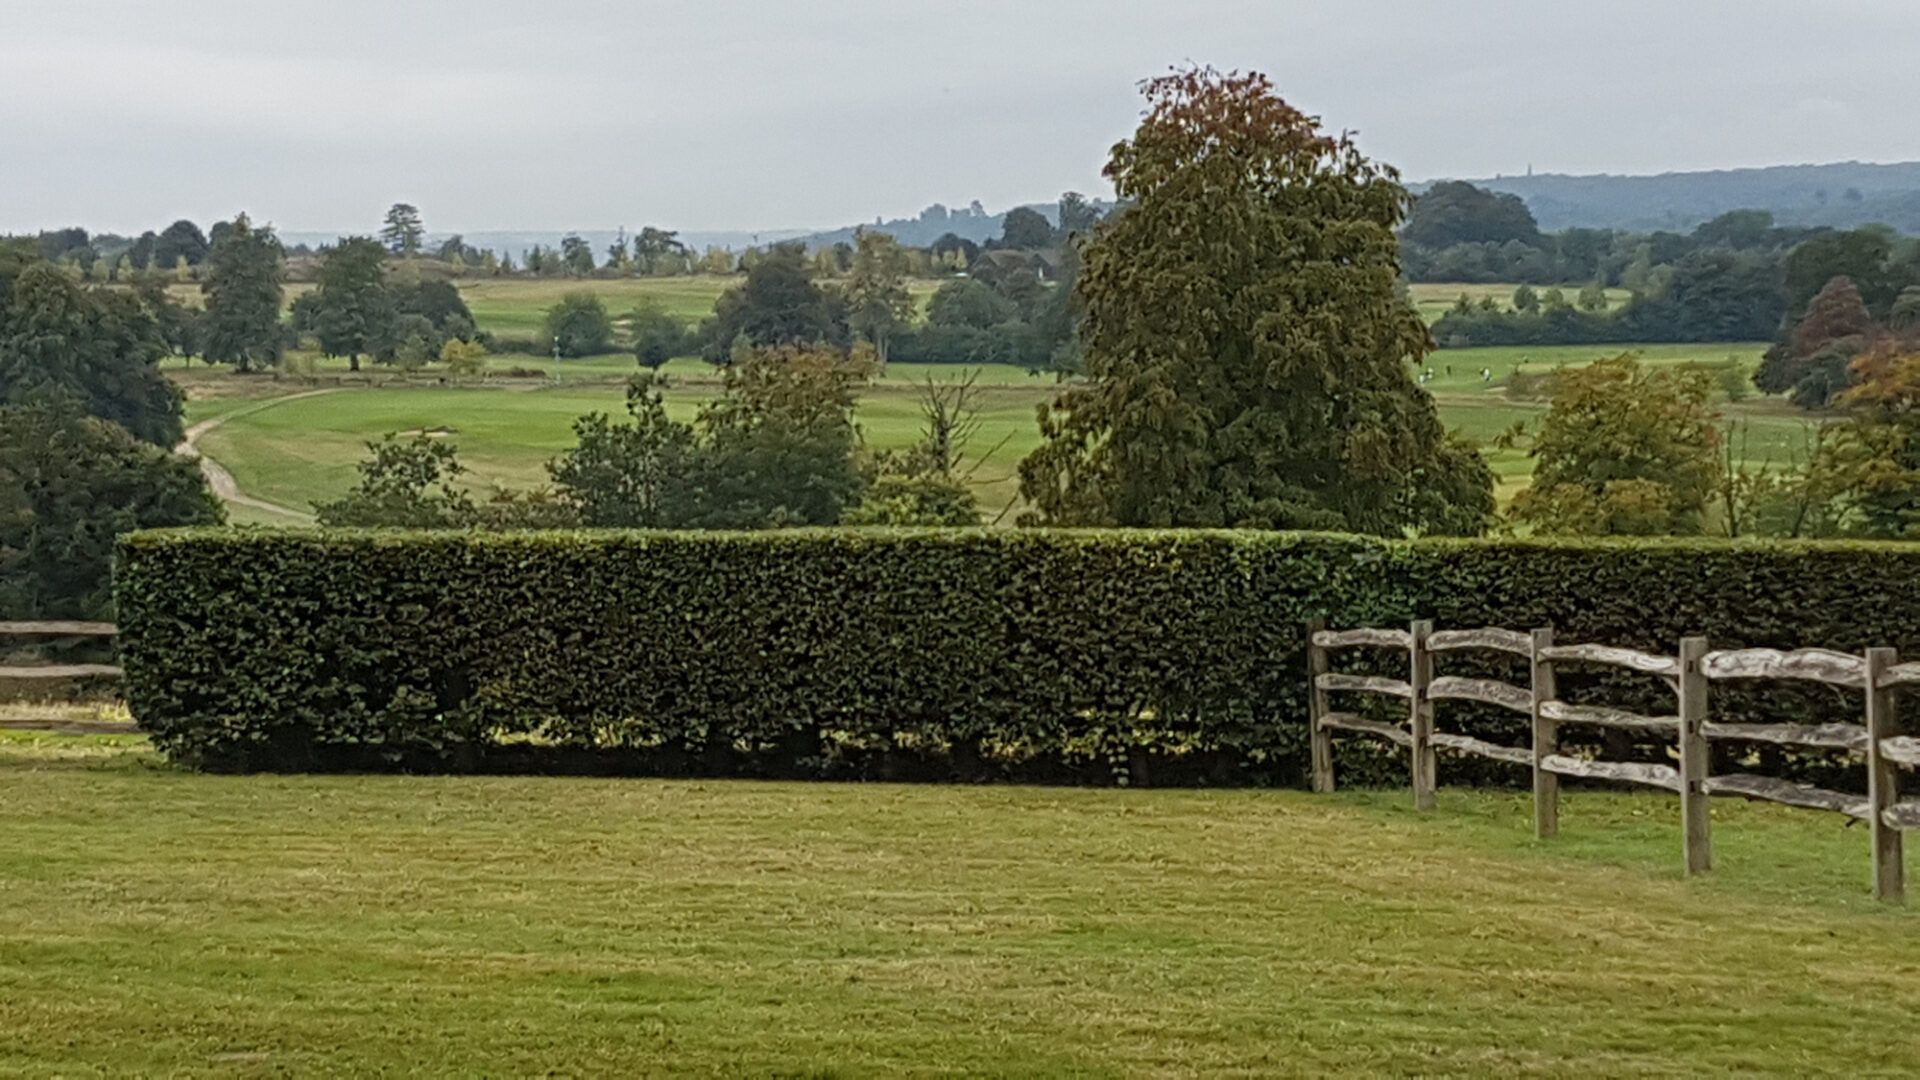 view of large head at bottom of garden looking out over open countryside.